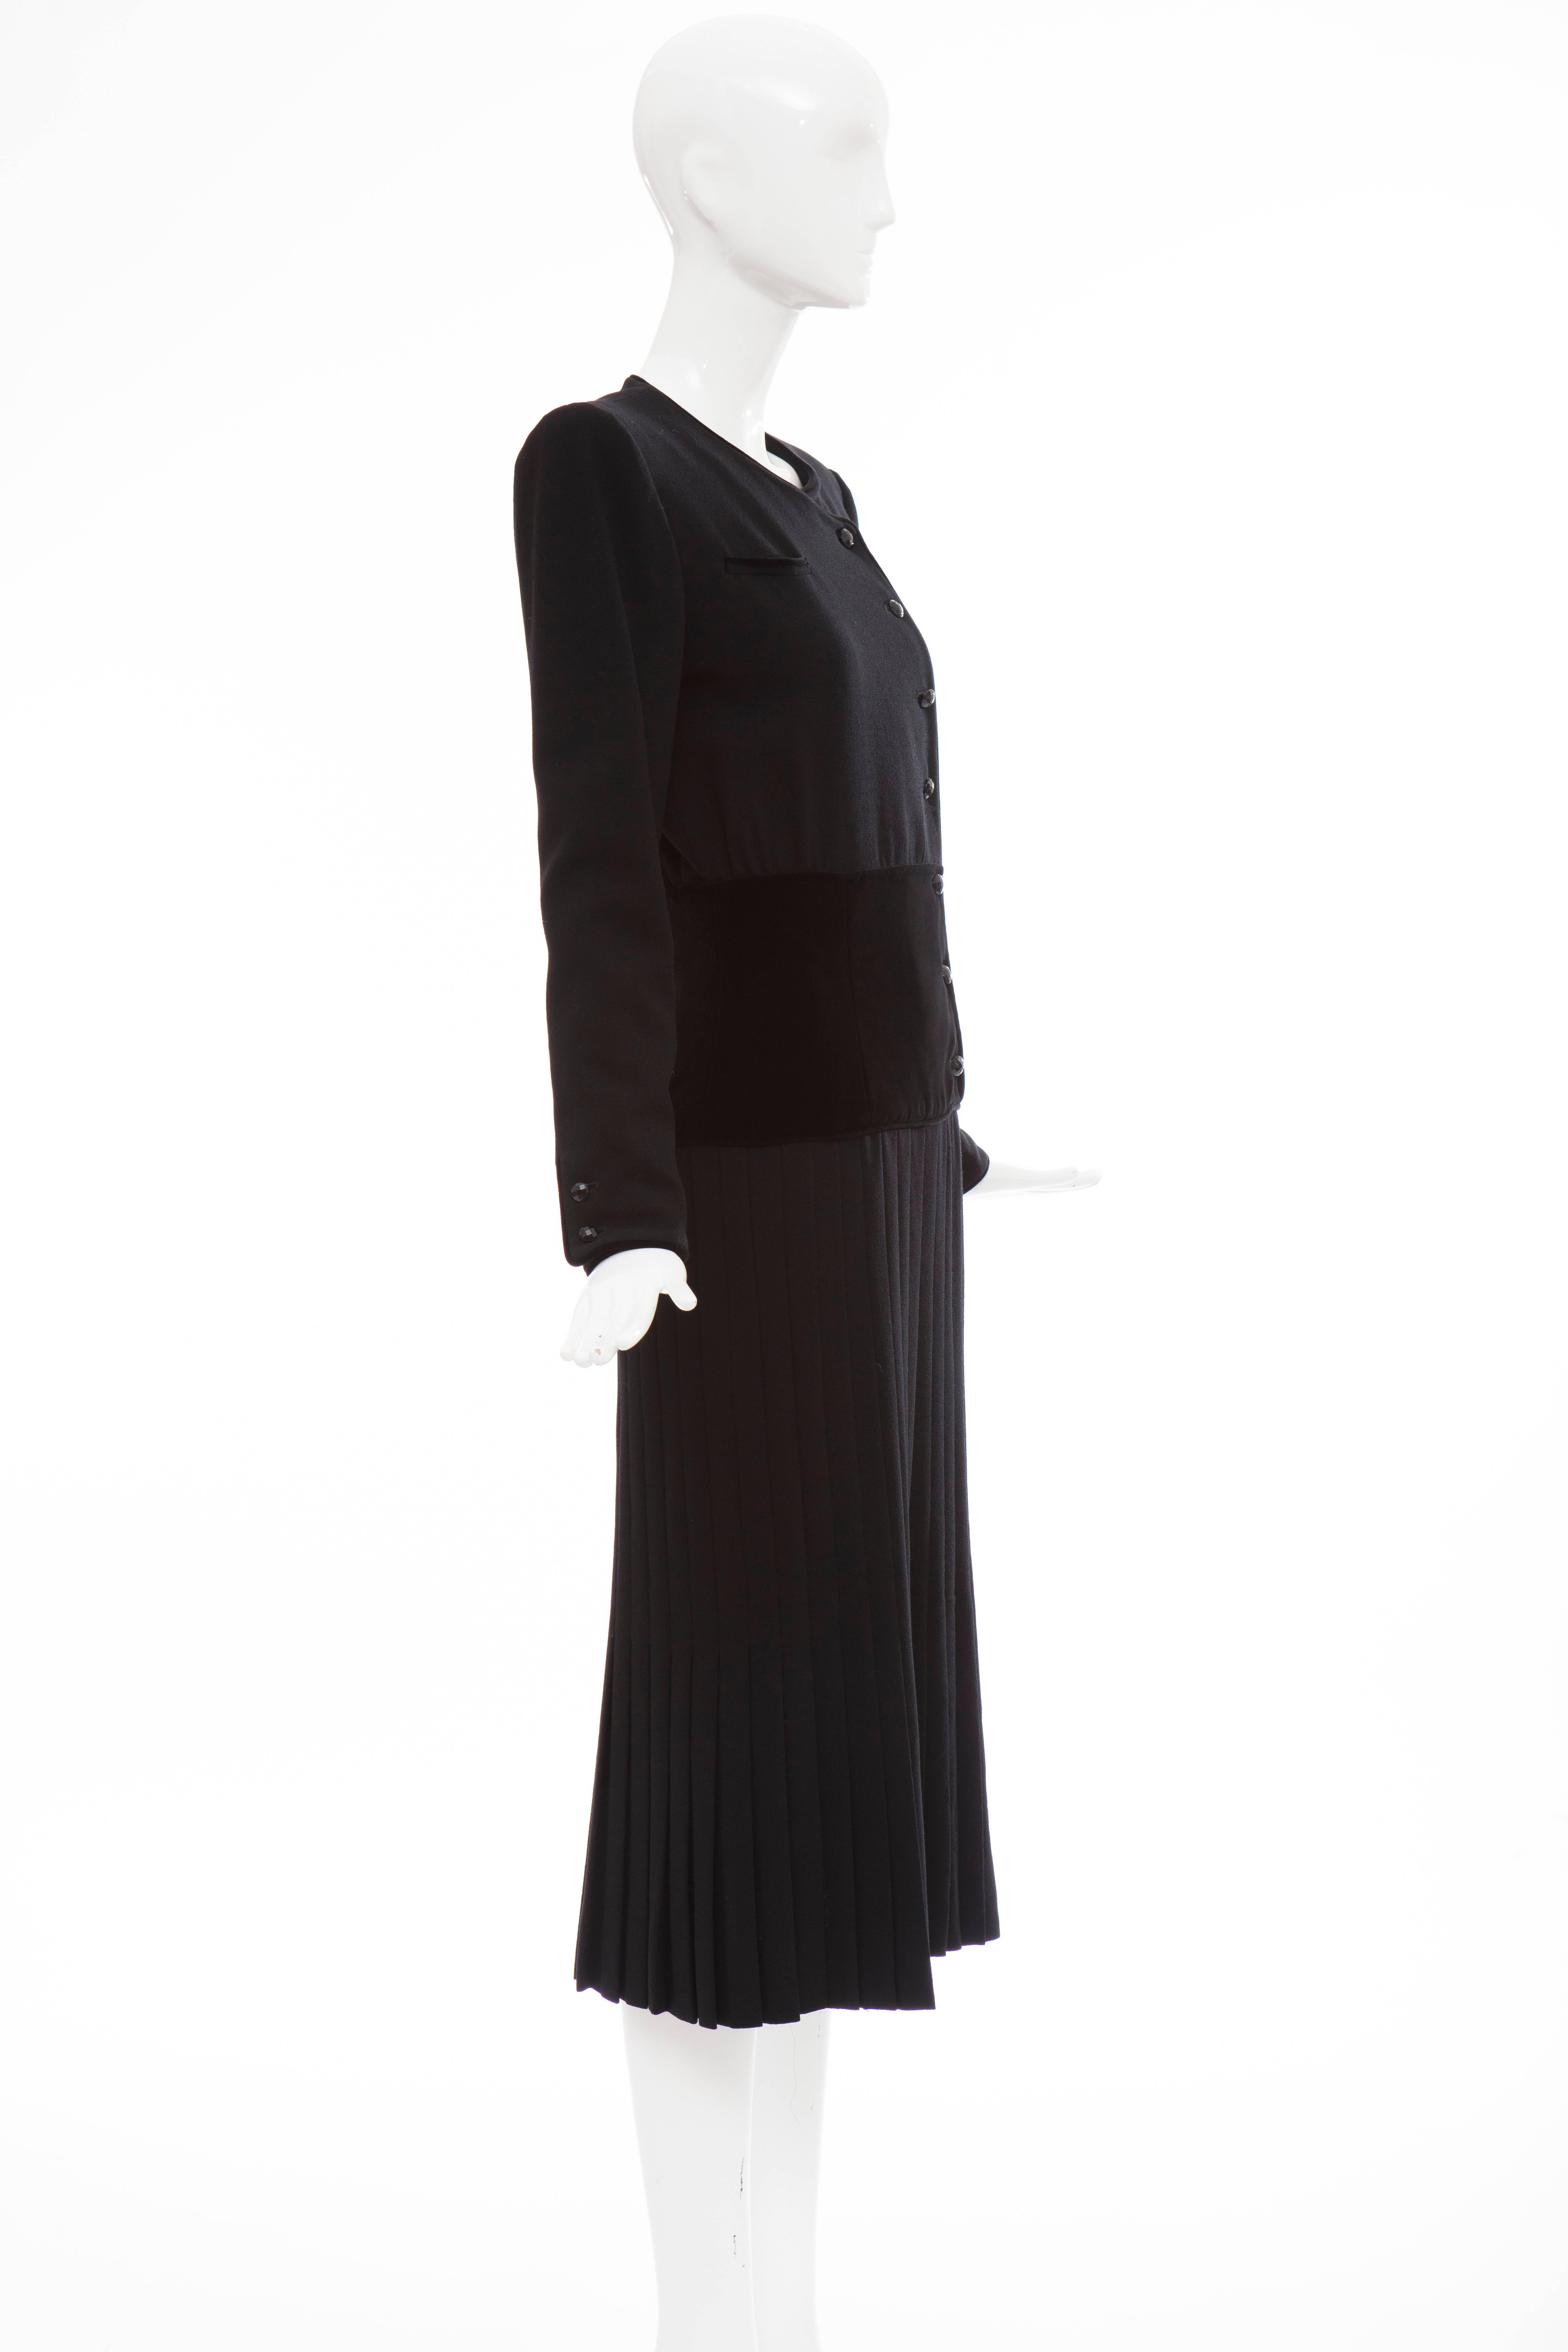 Valentino Black Wool Crepe And Velvet Evening Dress, Circa 1980's In Excellent Condition For Sale In Cincinnati, OH